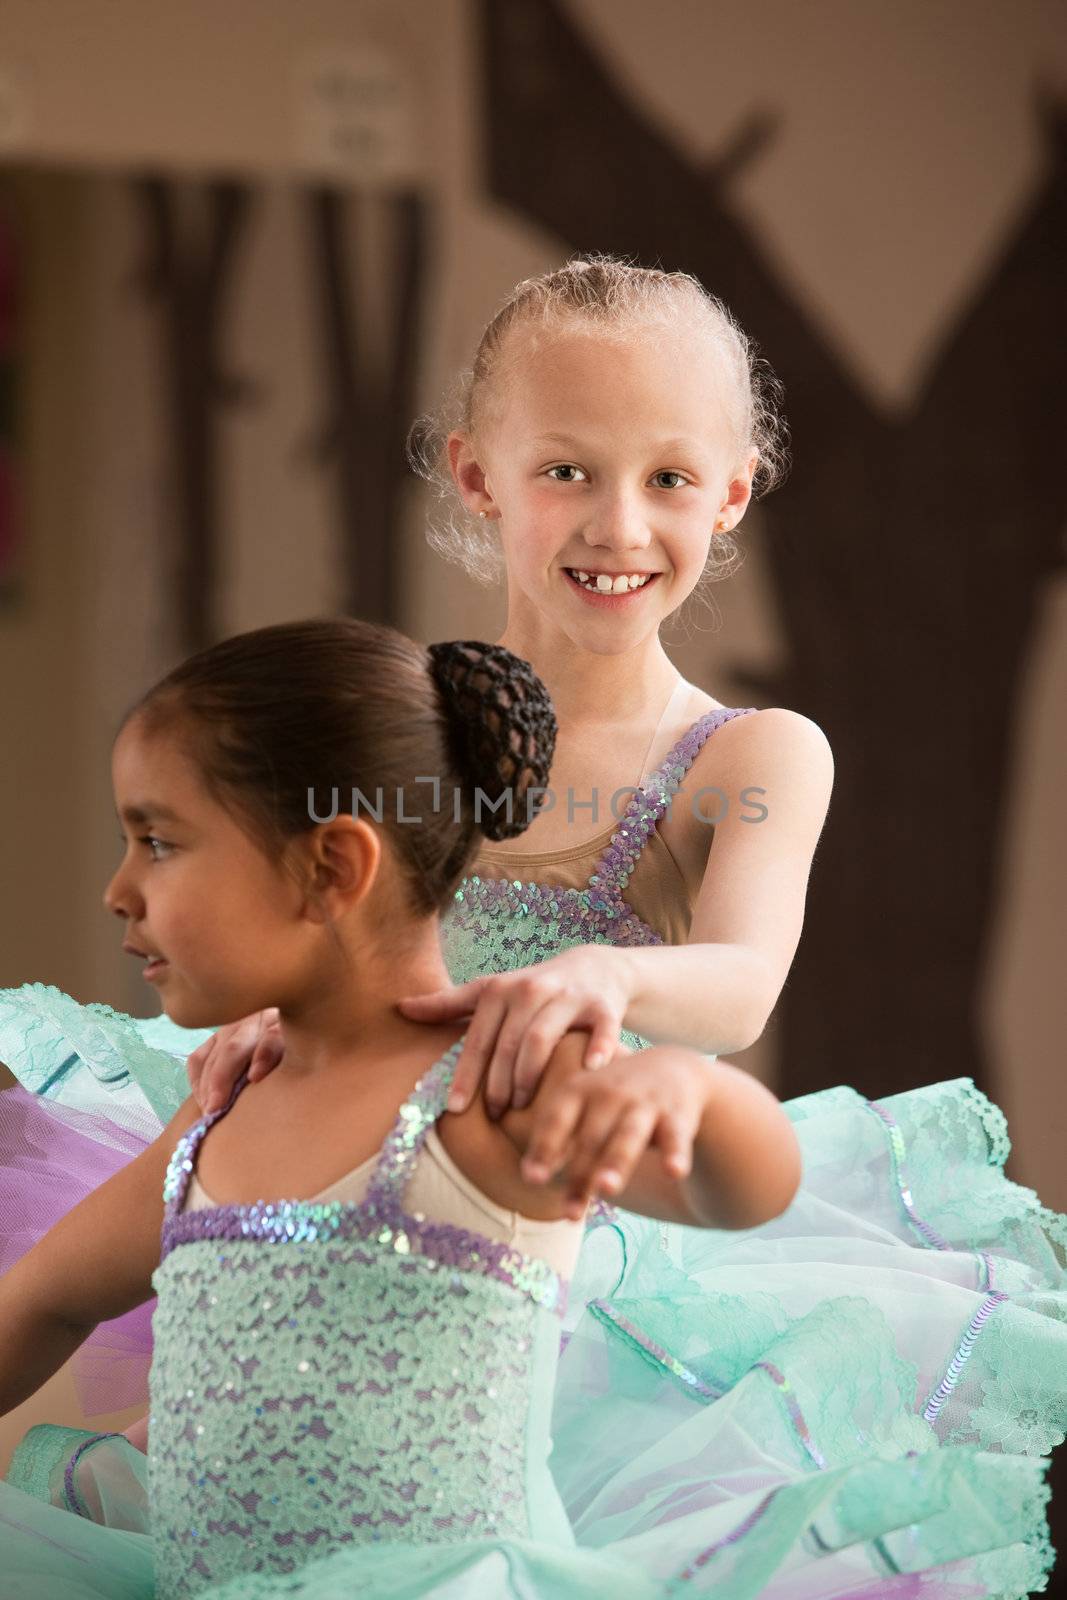 Cute child ballet student helps her partner during rehearsal